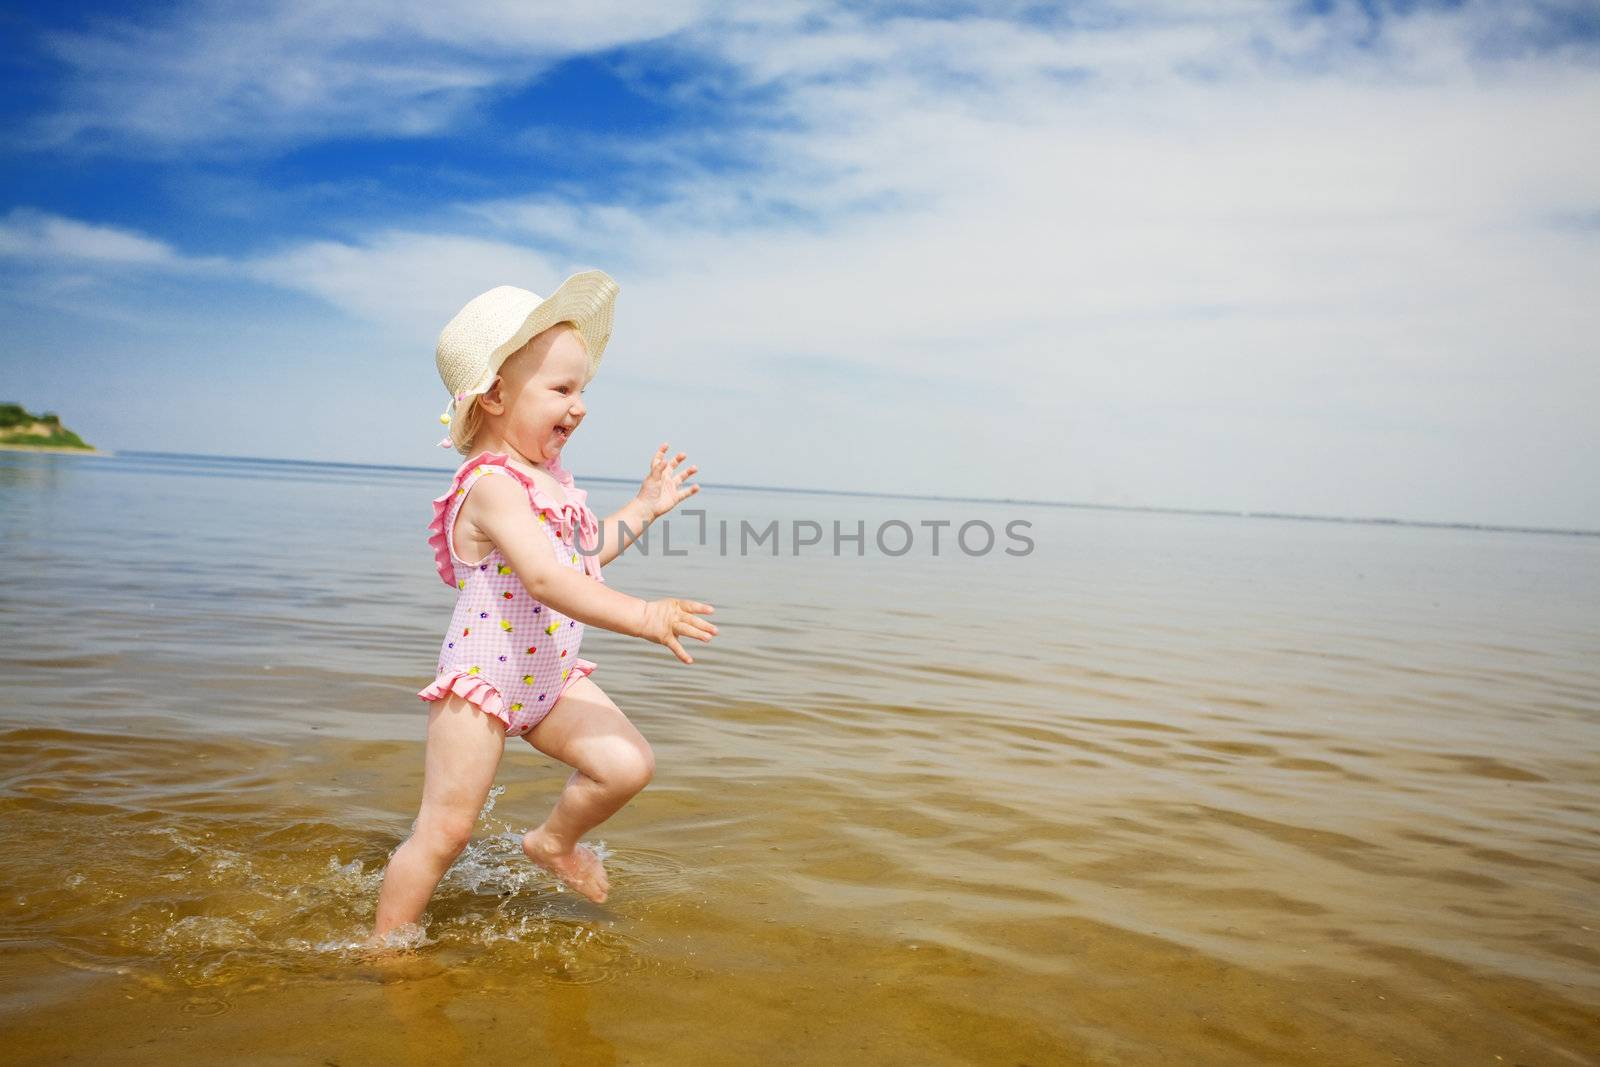 blue sky, water and running child by vsurkov